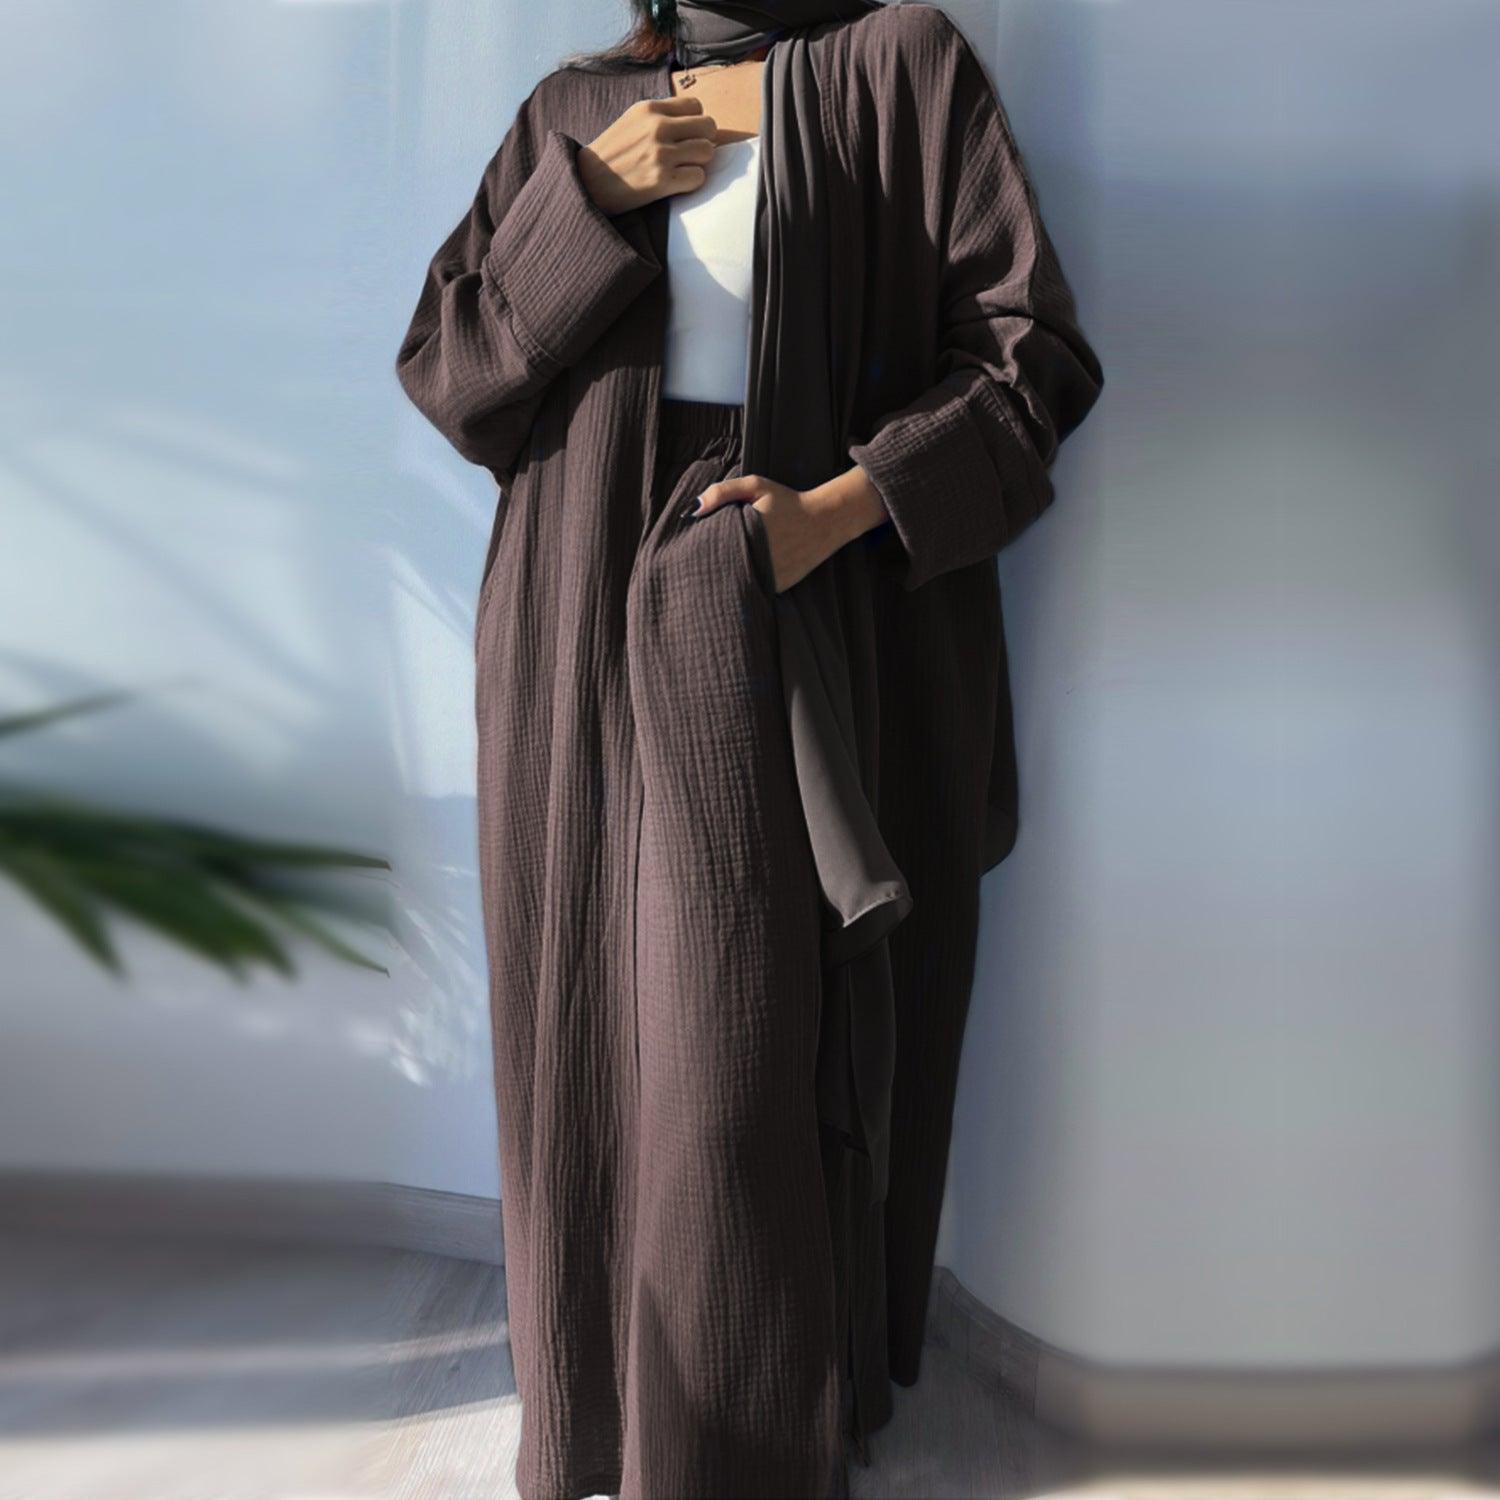 MOA064 Casual Open Abaya With Loose Pants 2 - Piece Set - Mariam's Collection